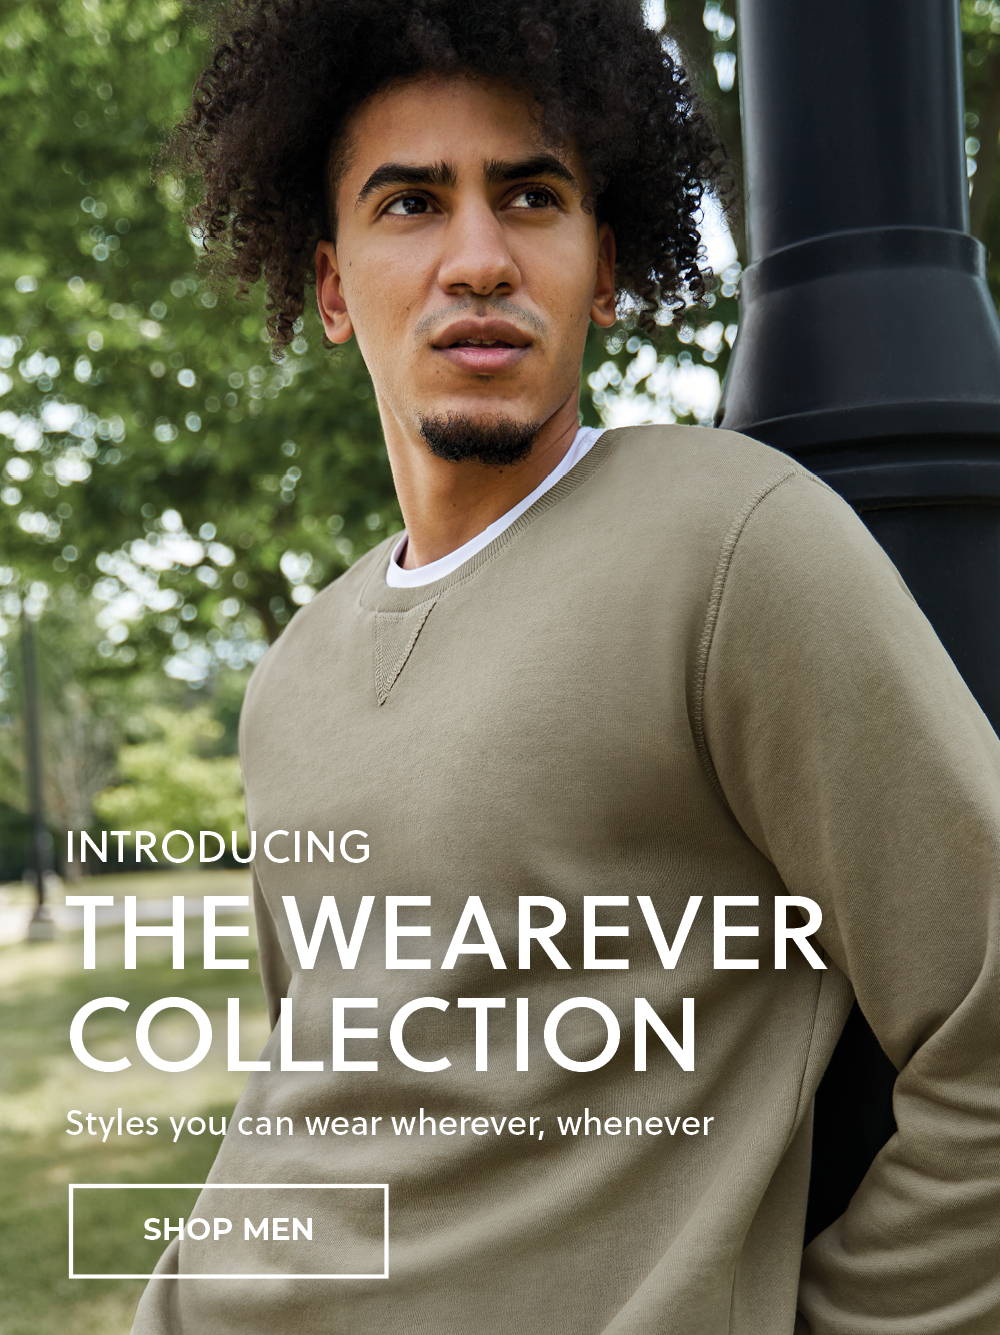 Introducing the Wearever Collection. Styles you can wear wherever, whenever by American Tall.